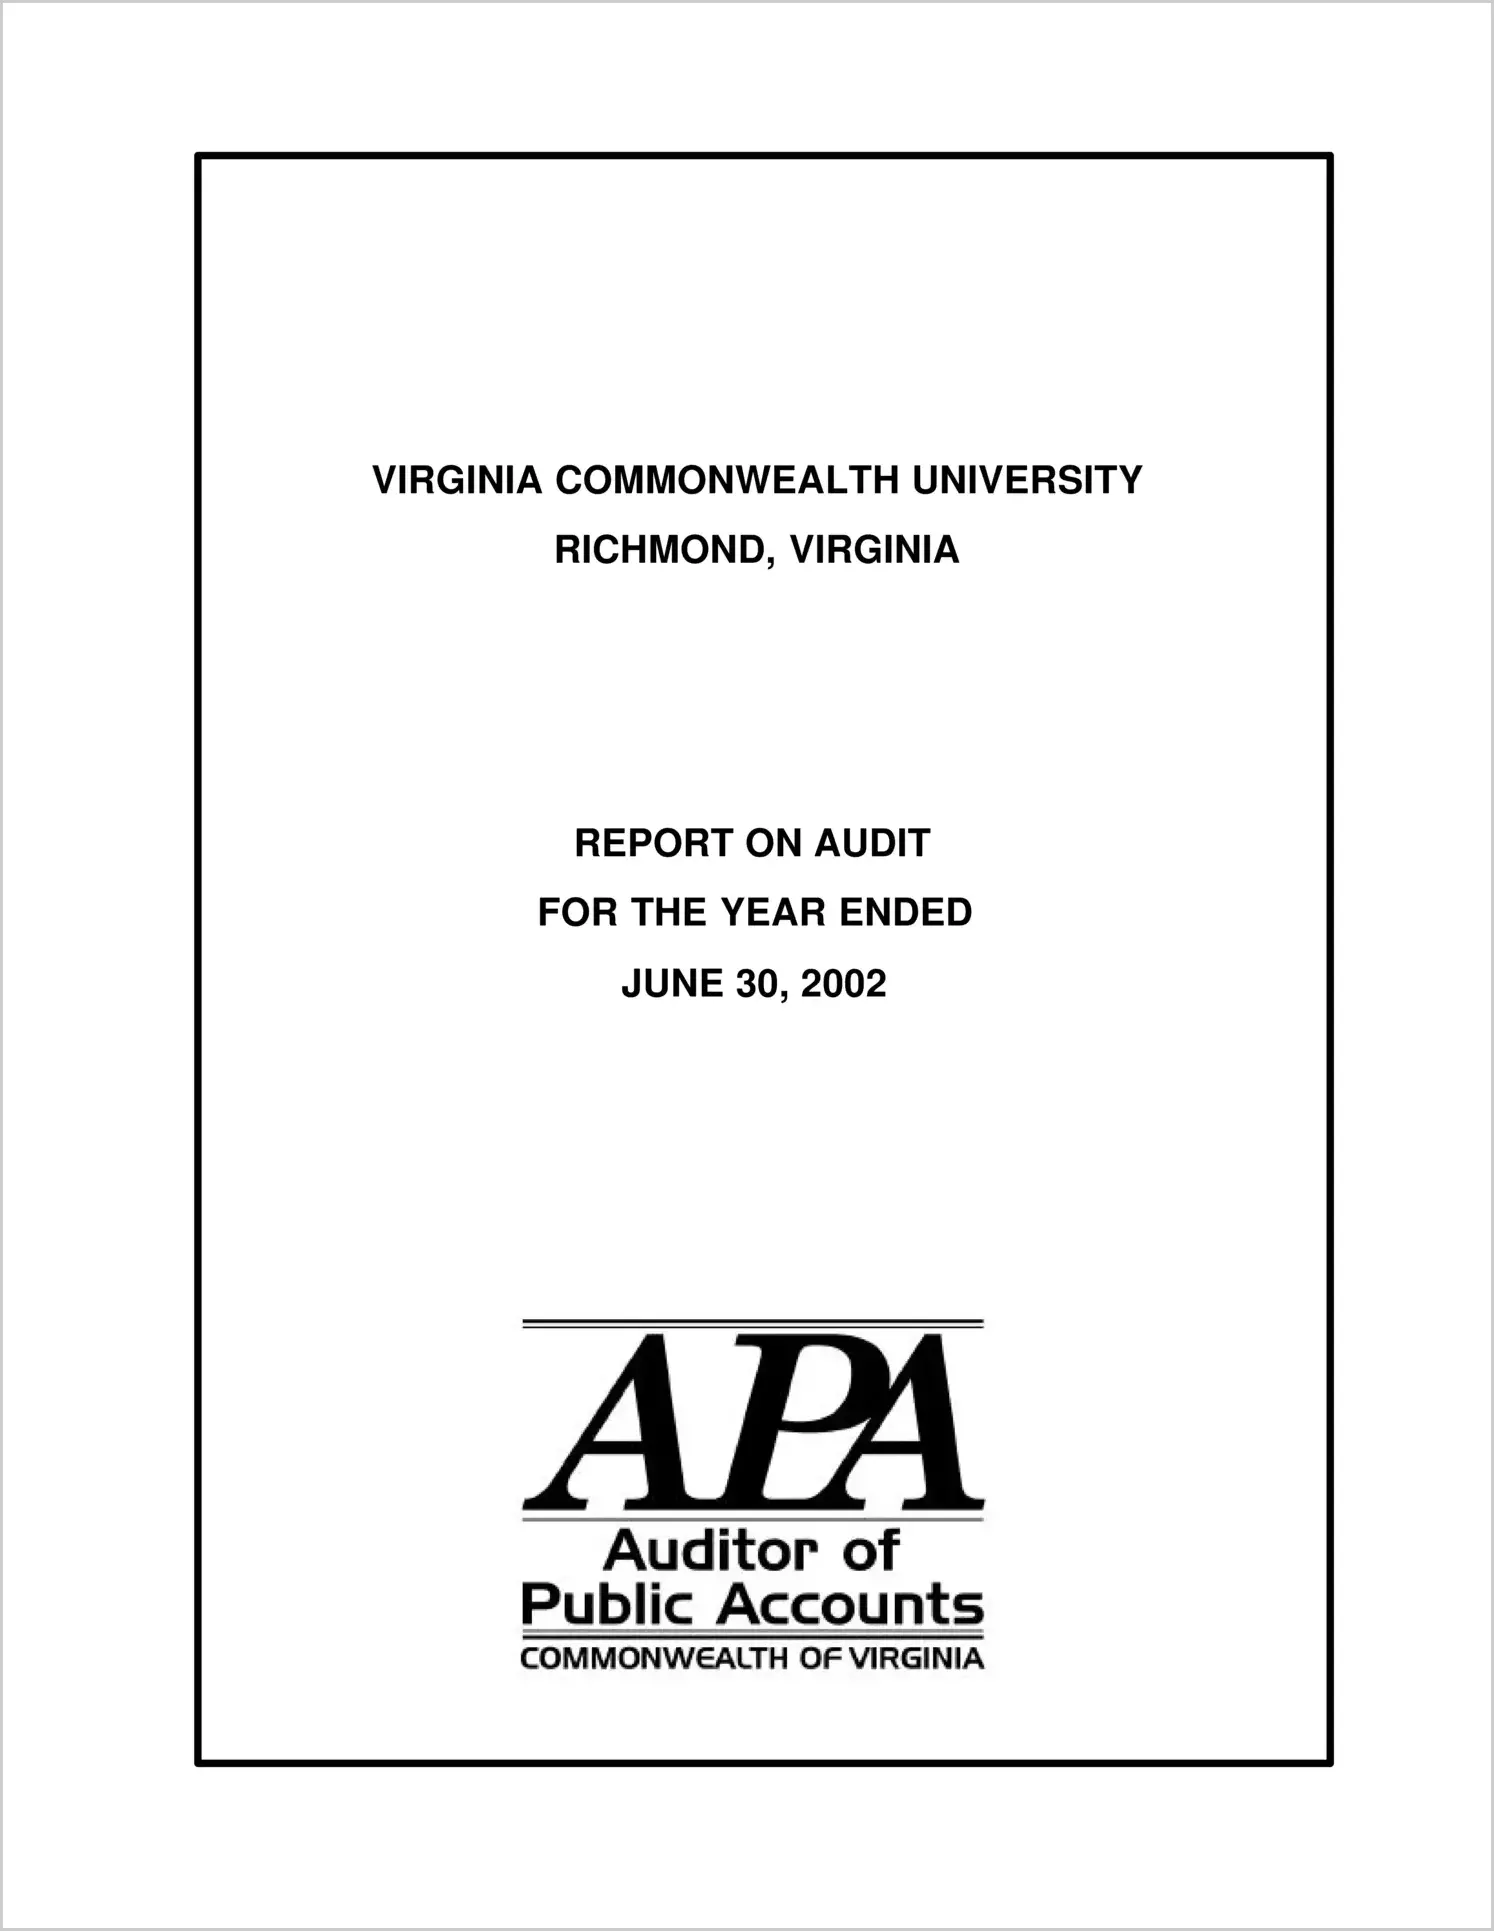 Virginia Commonwealth University for the year ended June 30, 2002